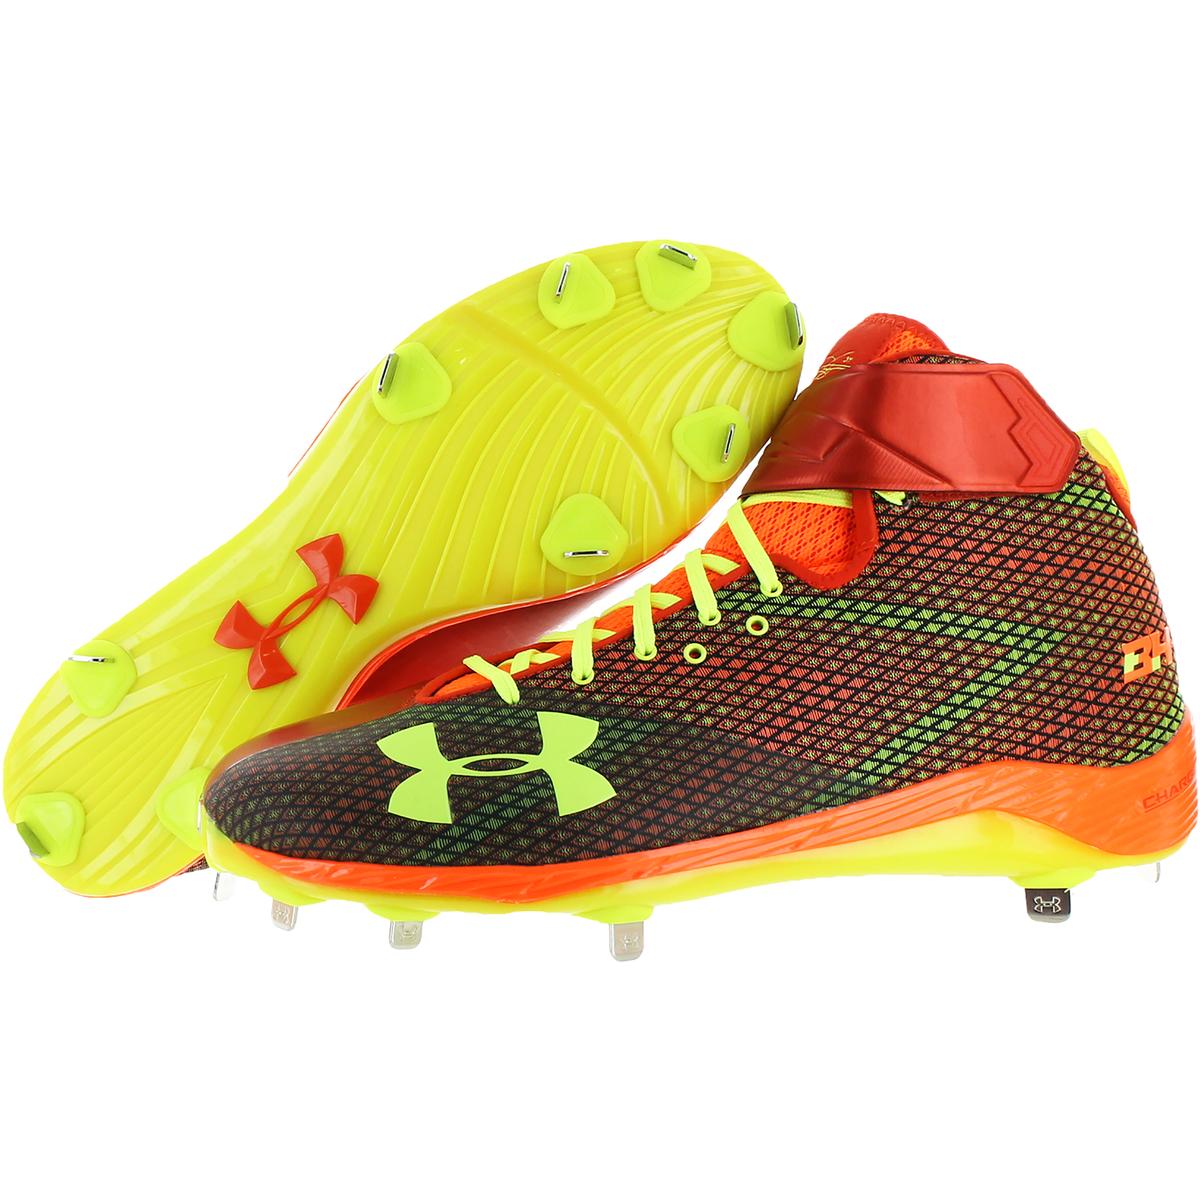 under armour men's harper one mid st metal baseball cleats